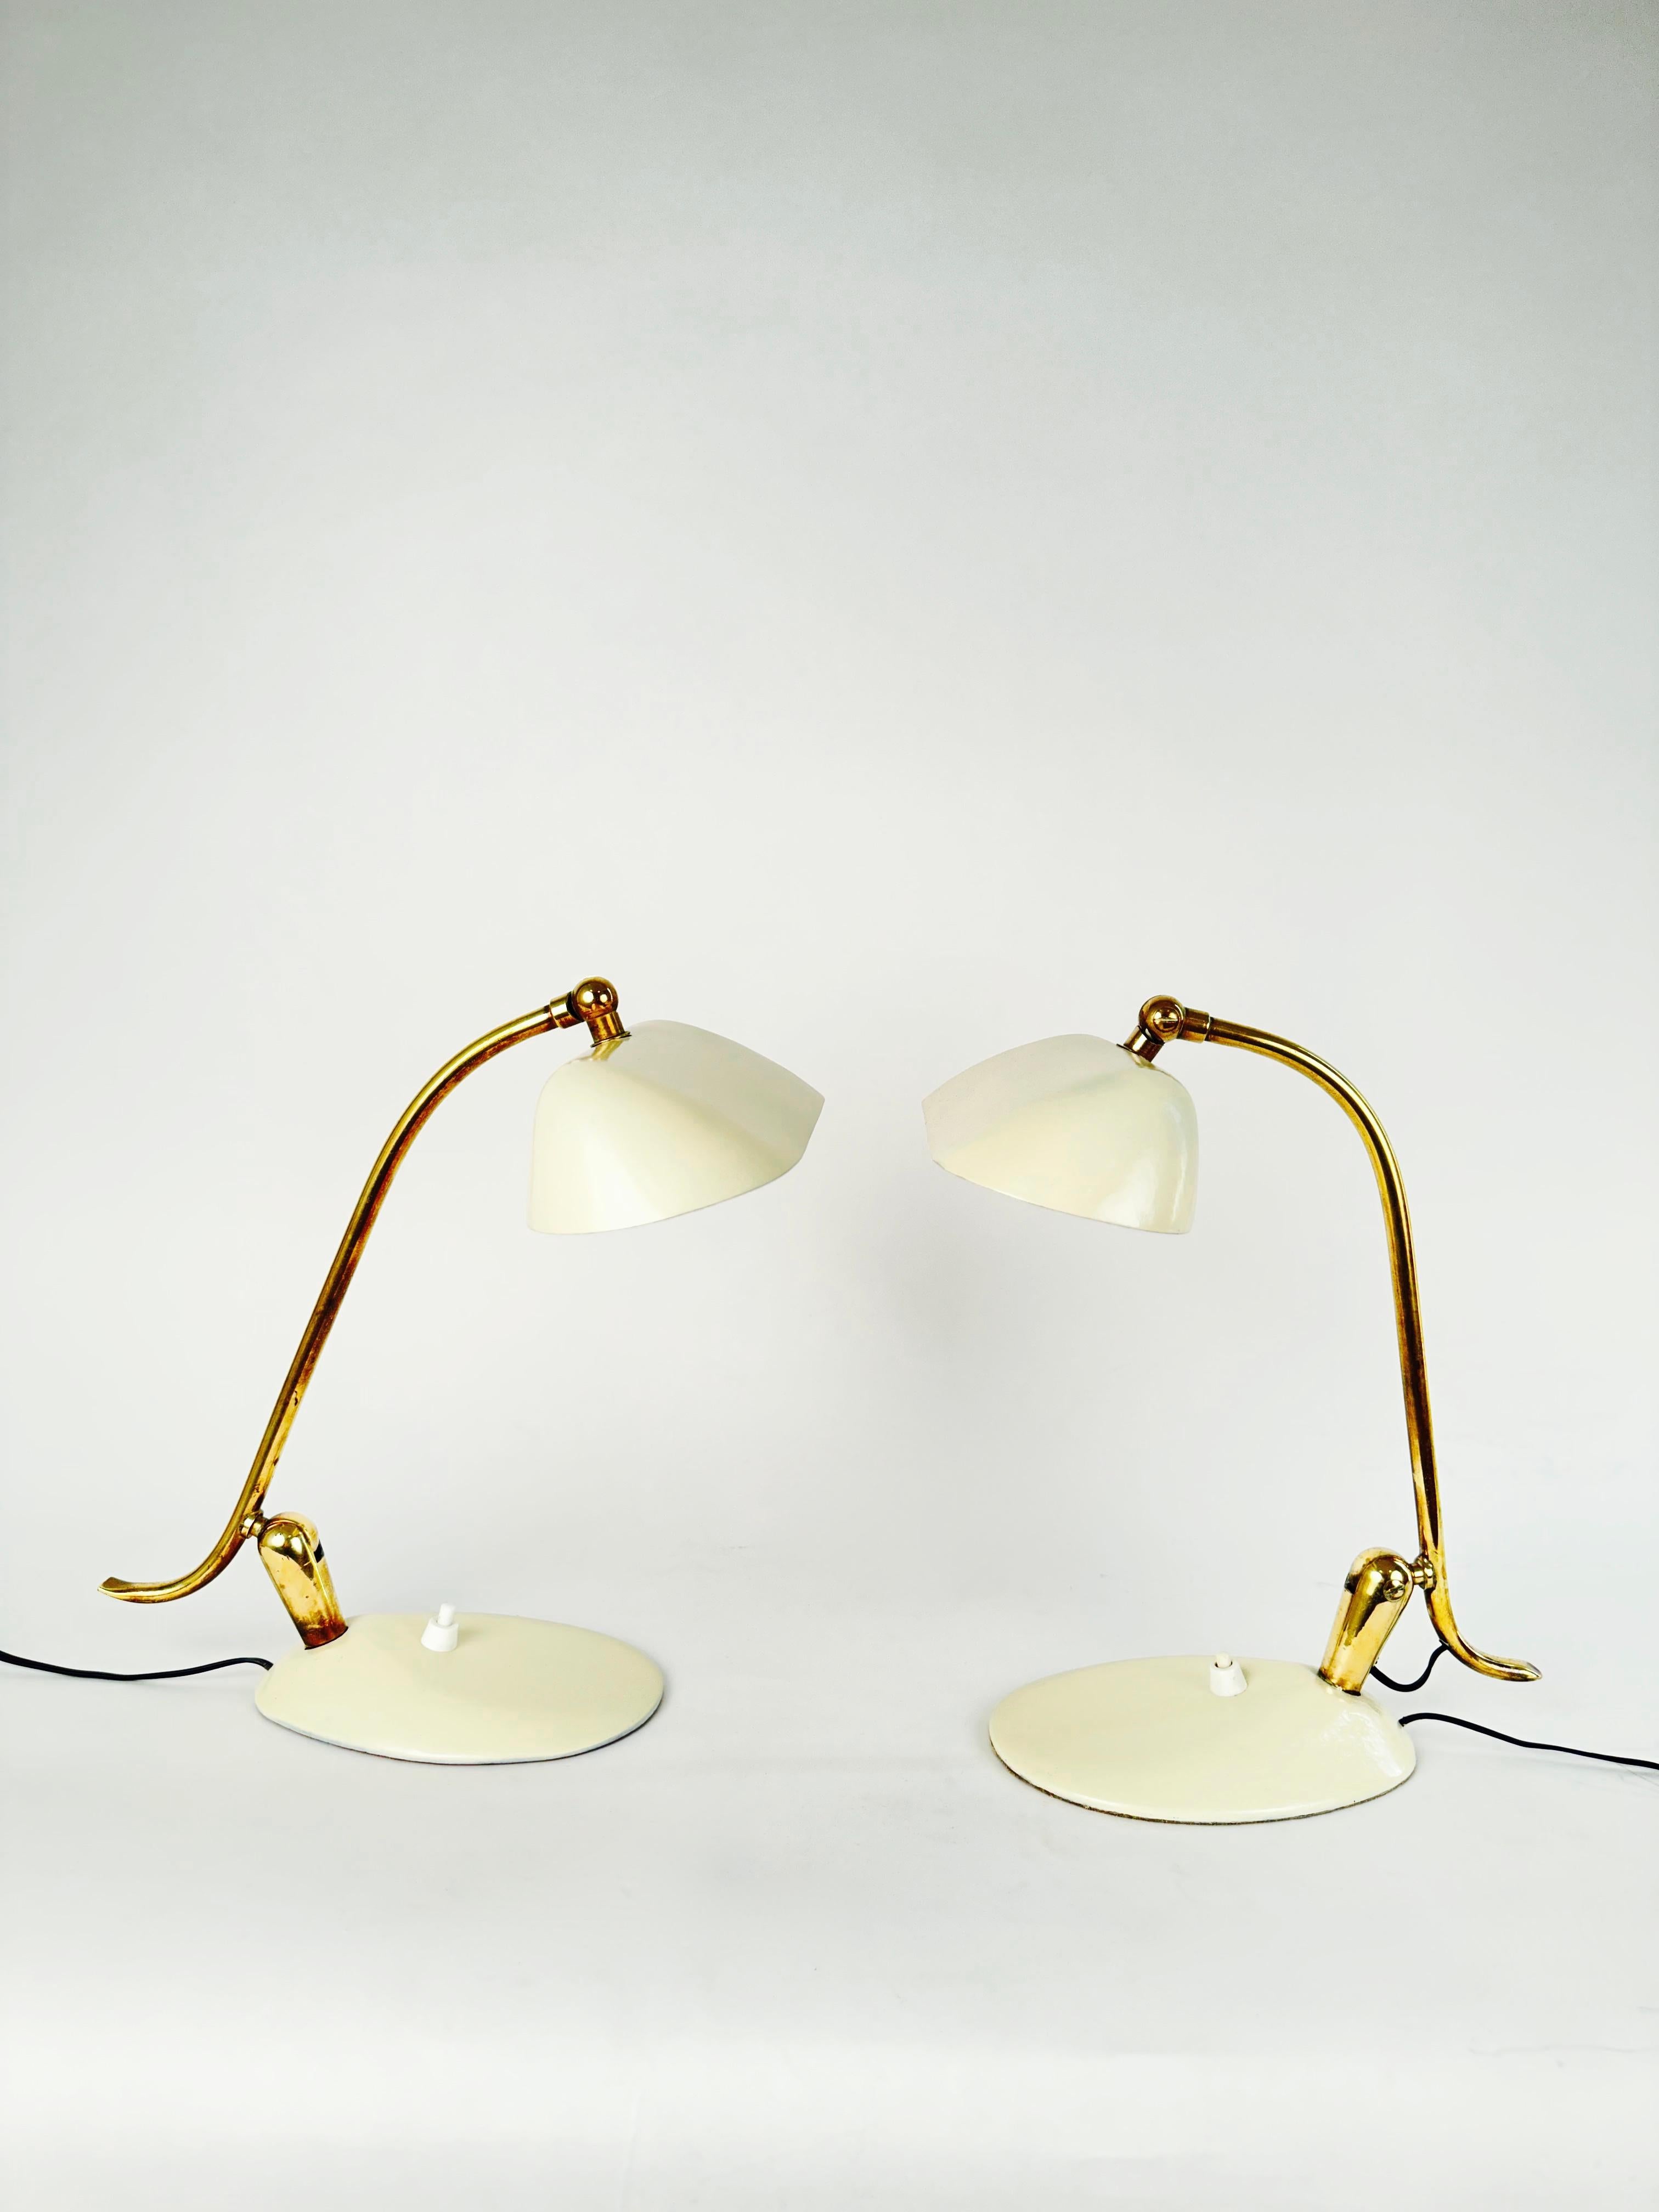 Mid-Century Modern Stilnovo Pair of Table Lamps, Italy, 1950 For Sale